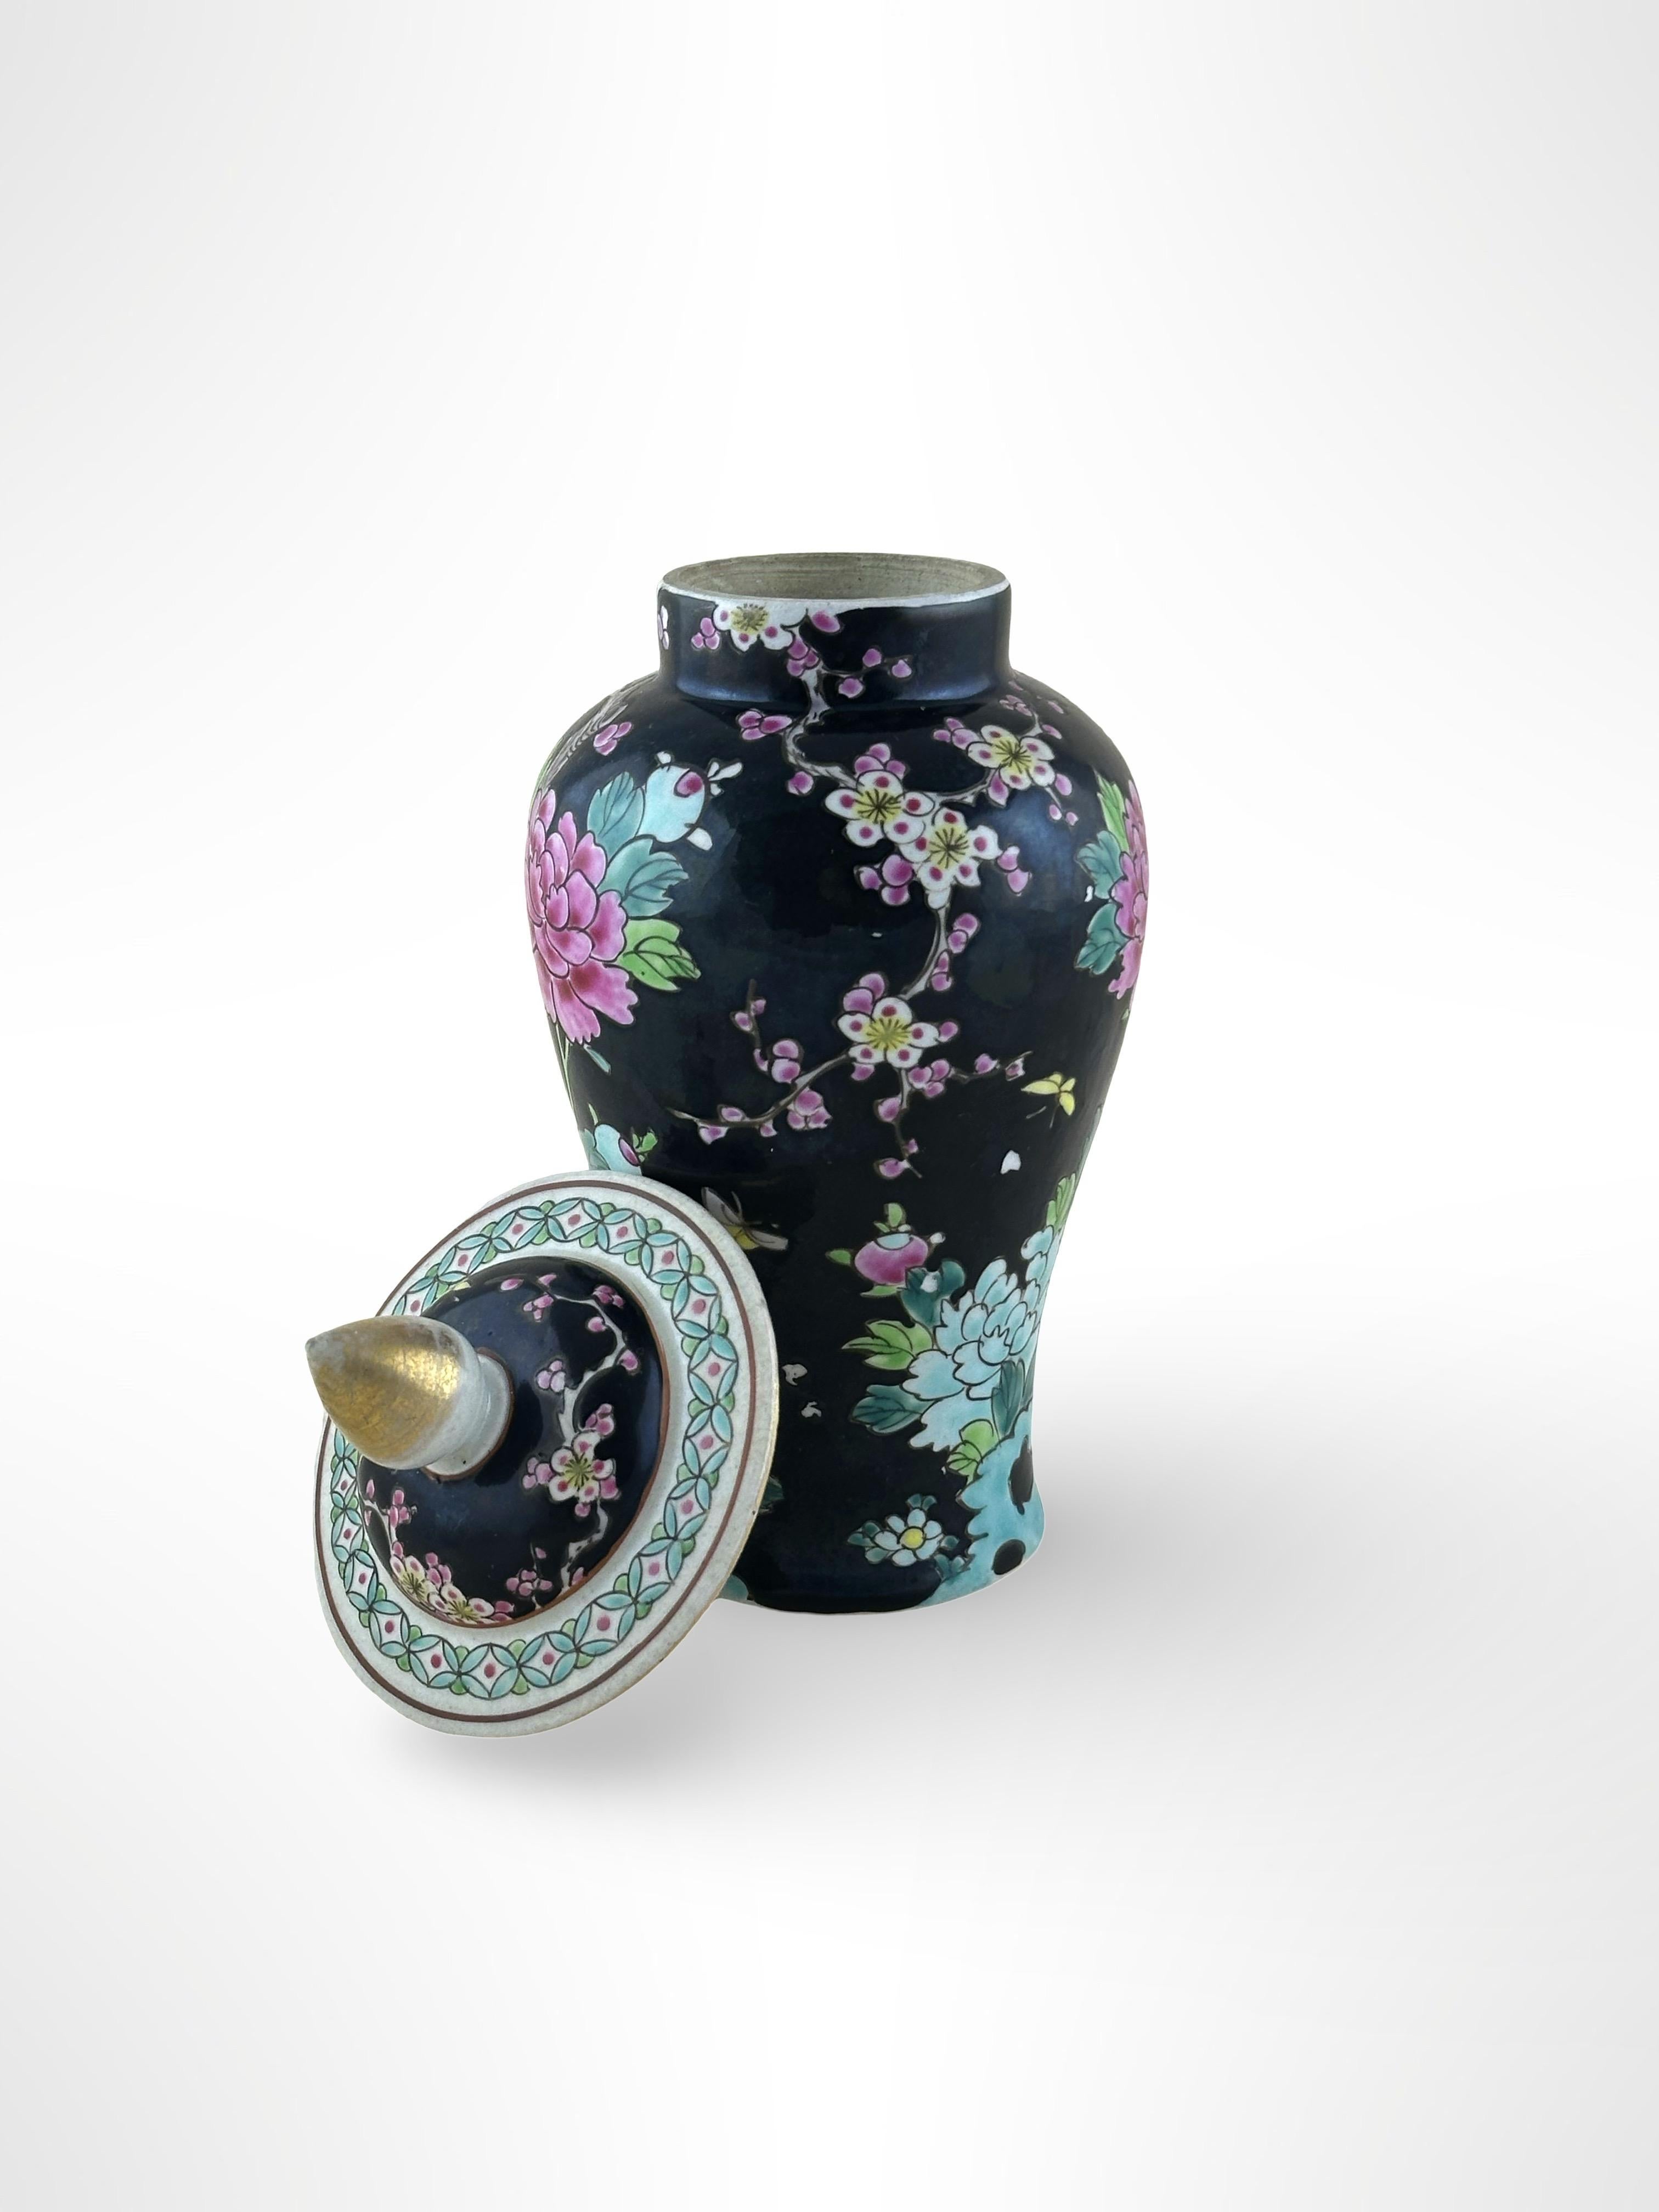 A bold 'famille noire' style porcelain temple jar.  Handcrafted in Japan at the beginning of the 20th century, towards the end of the Meiji period.

The little porcelain temple jar is hand-painted with a landscape of flowering peony blossoms and